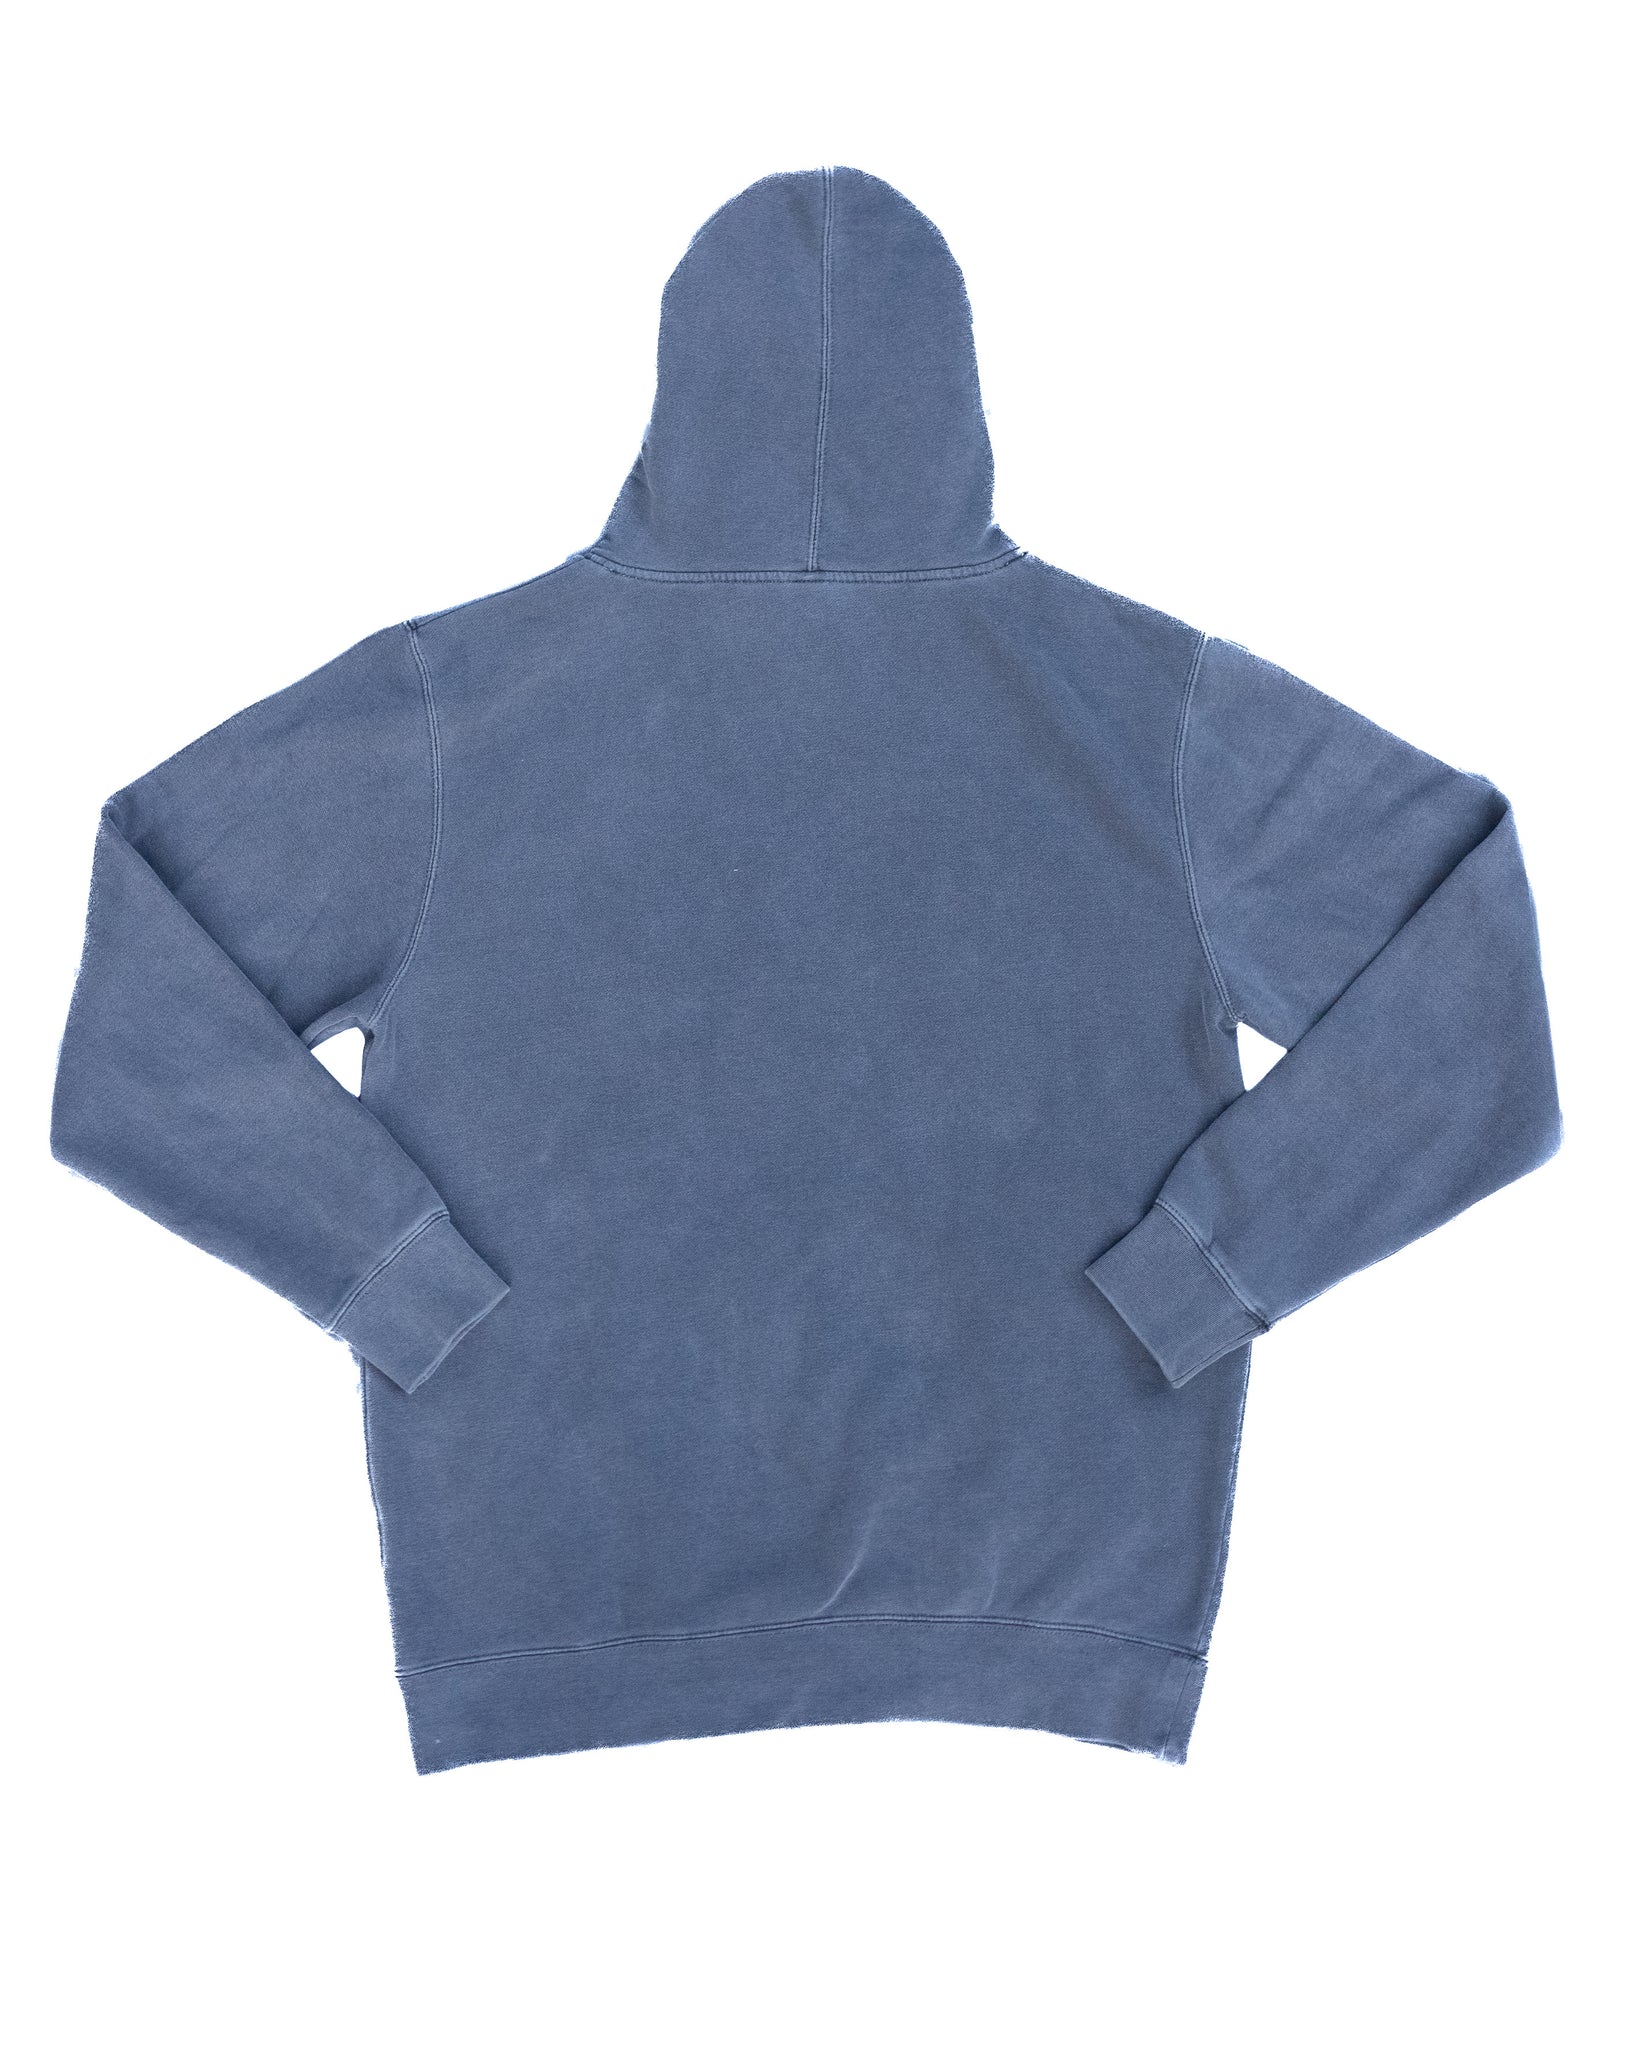 Washed Charcoal Lightweight Small Script Hoodie